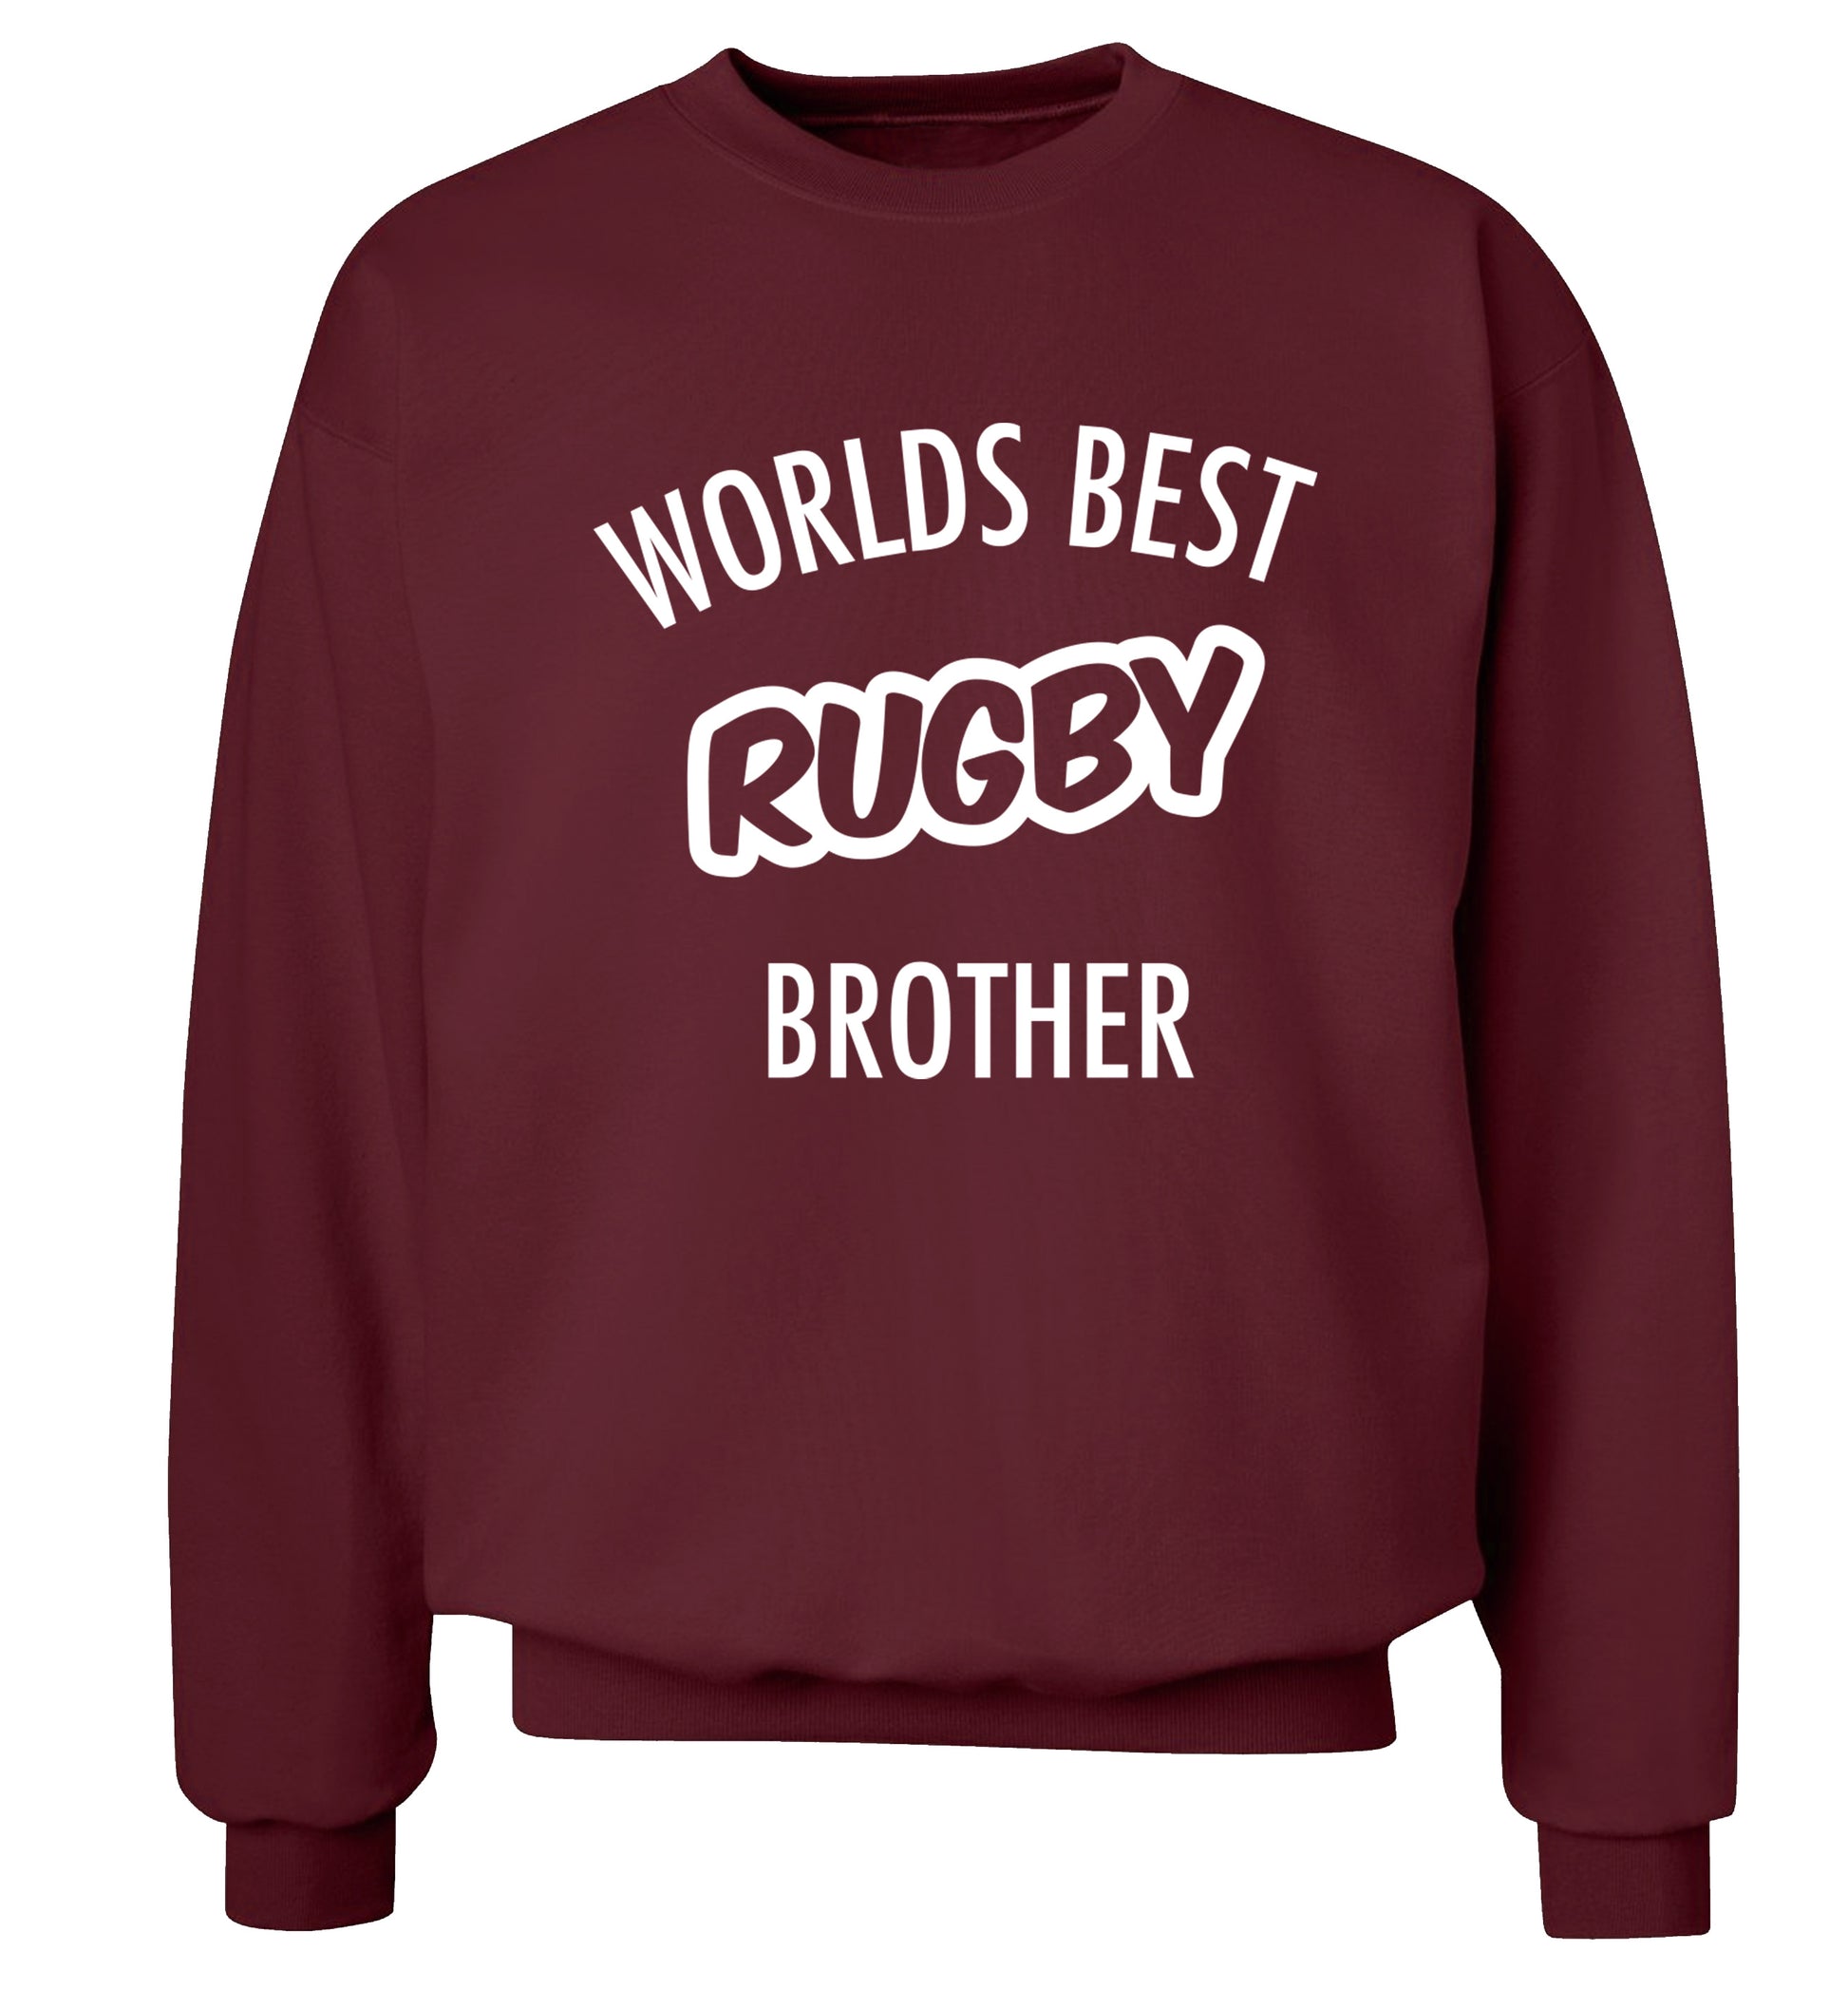 Worlds best rugby brother Adult's unisex maroon Sweater 2XL